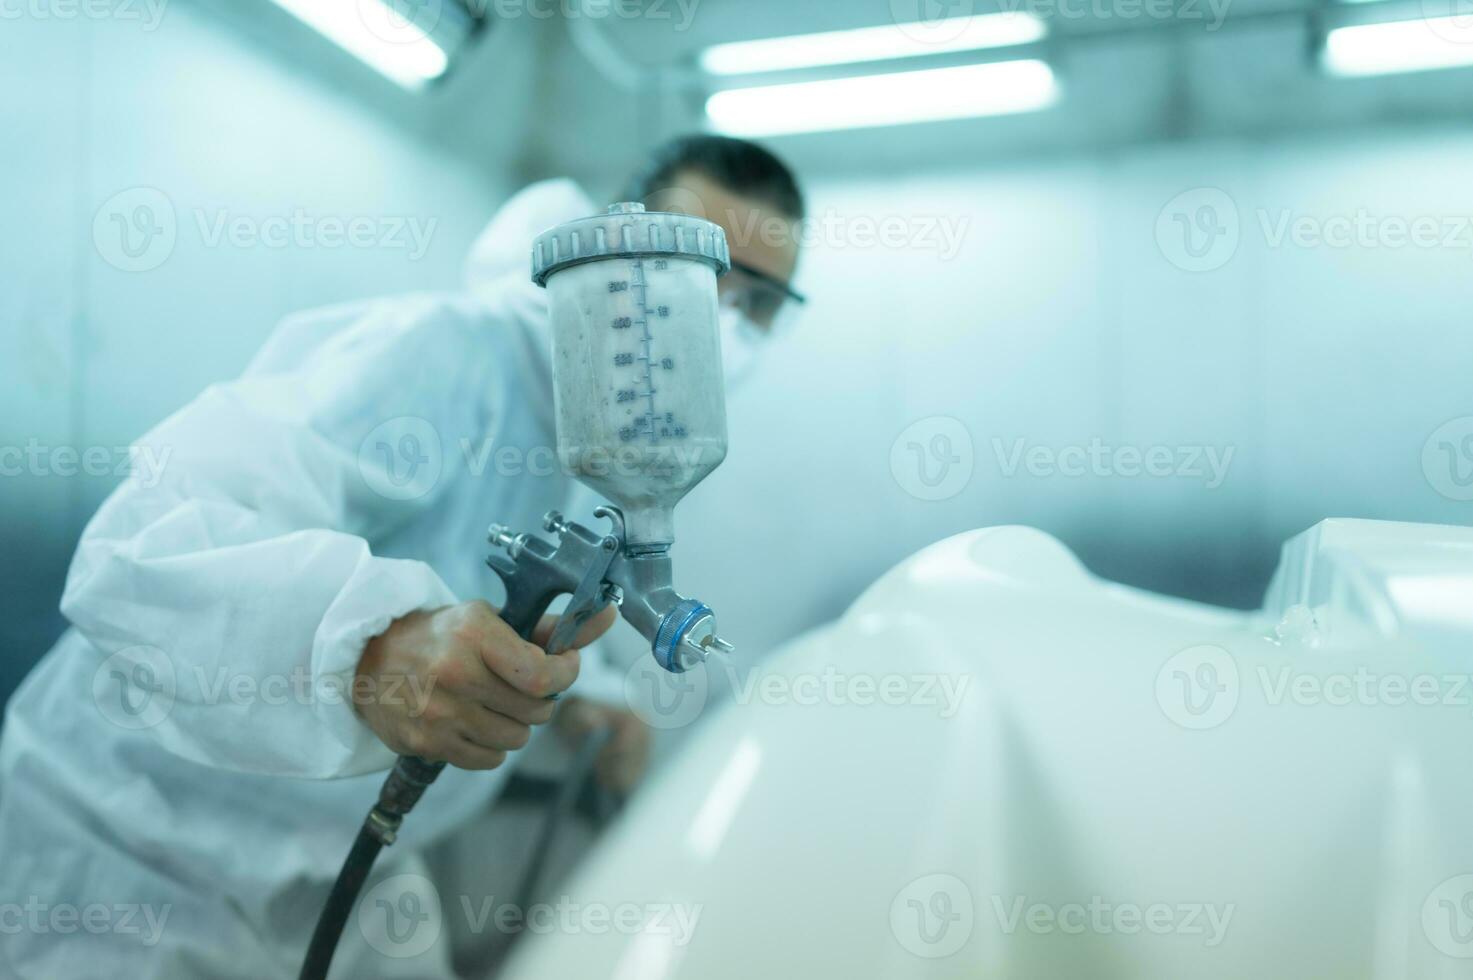 Auto mechanic in car spray room giving the spray nozzle injected into the car front bumper of the car with refinement in order to create beauty that blends with the original color of the car photo